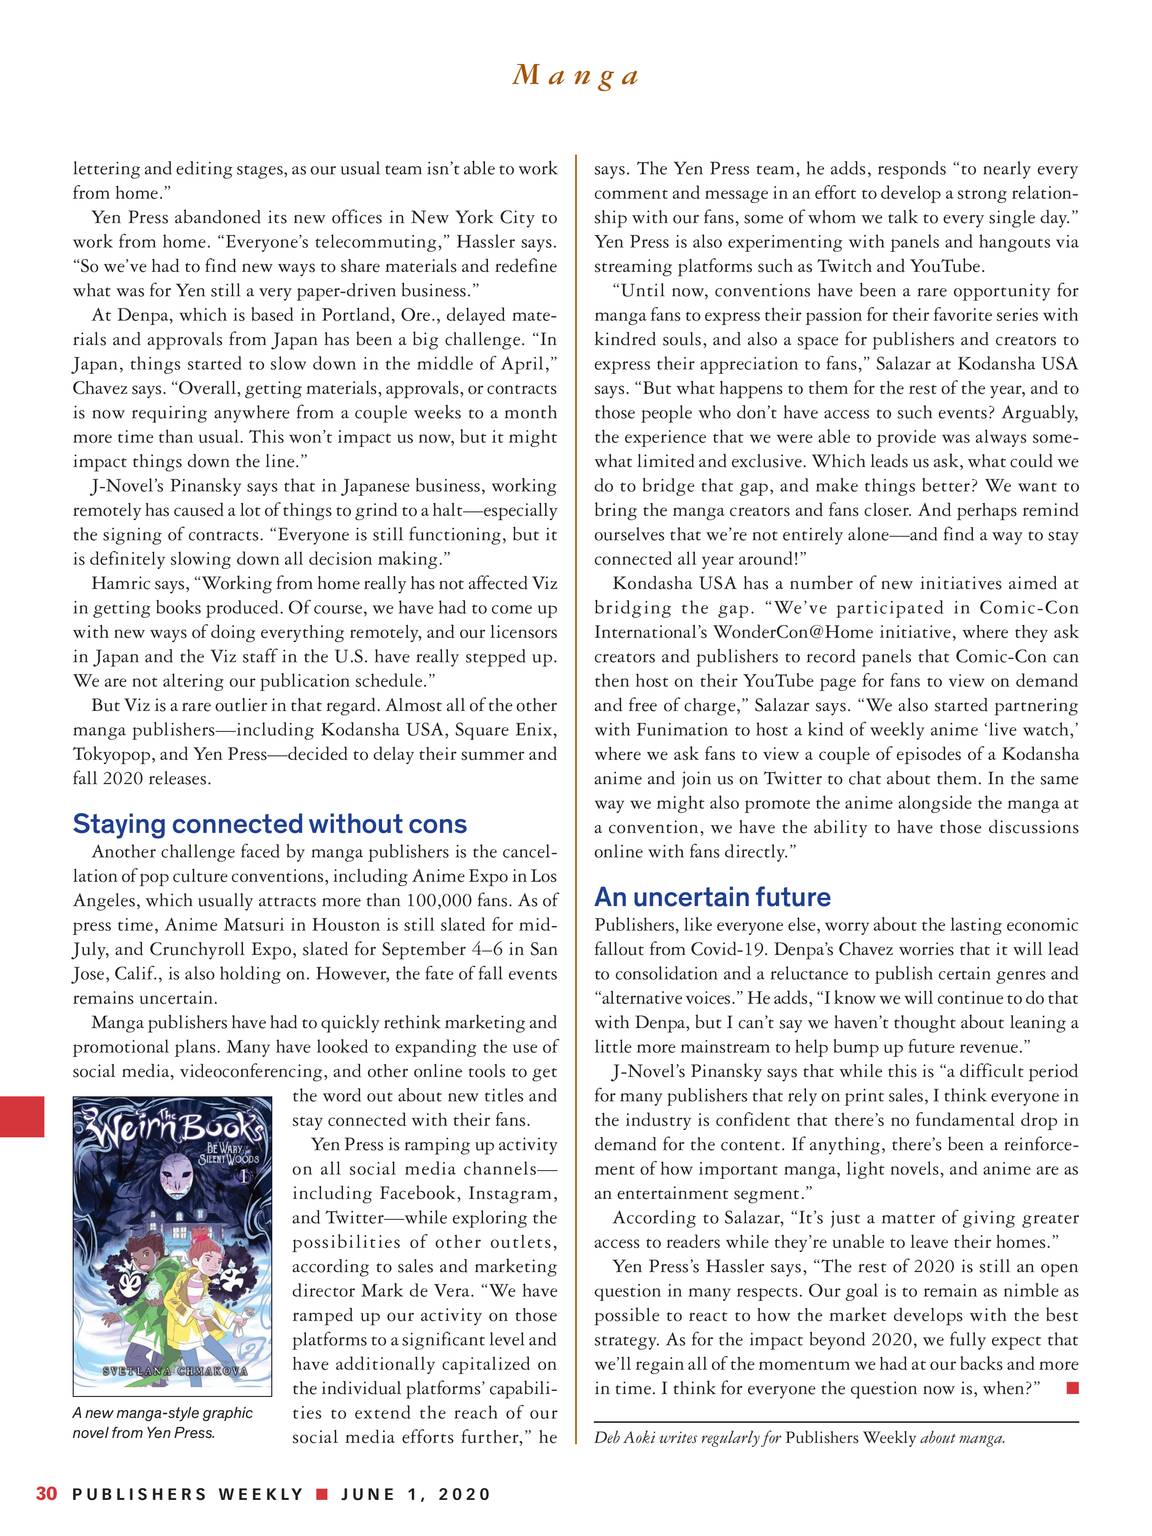 Publishers Weekly - June 1, 2020 - page 31